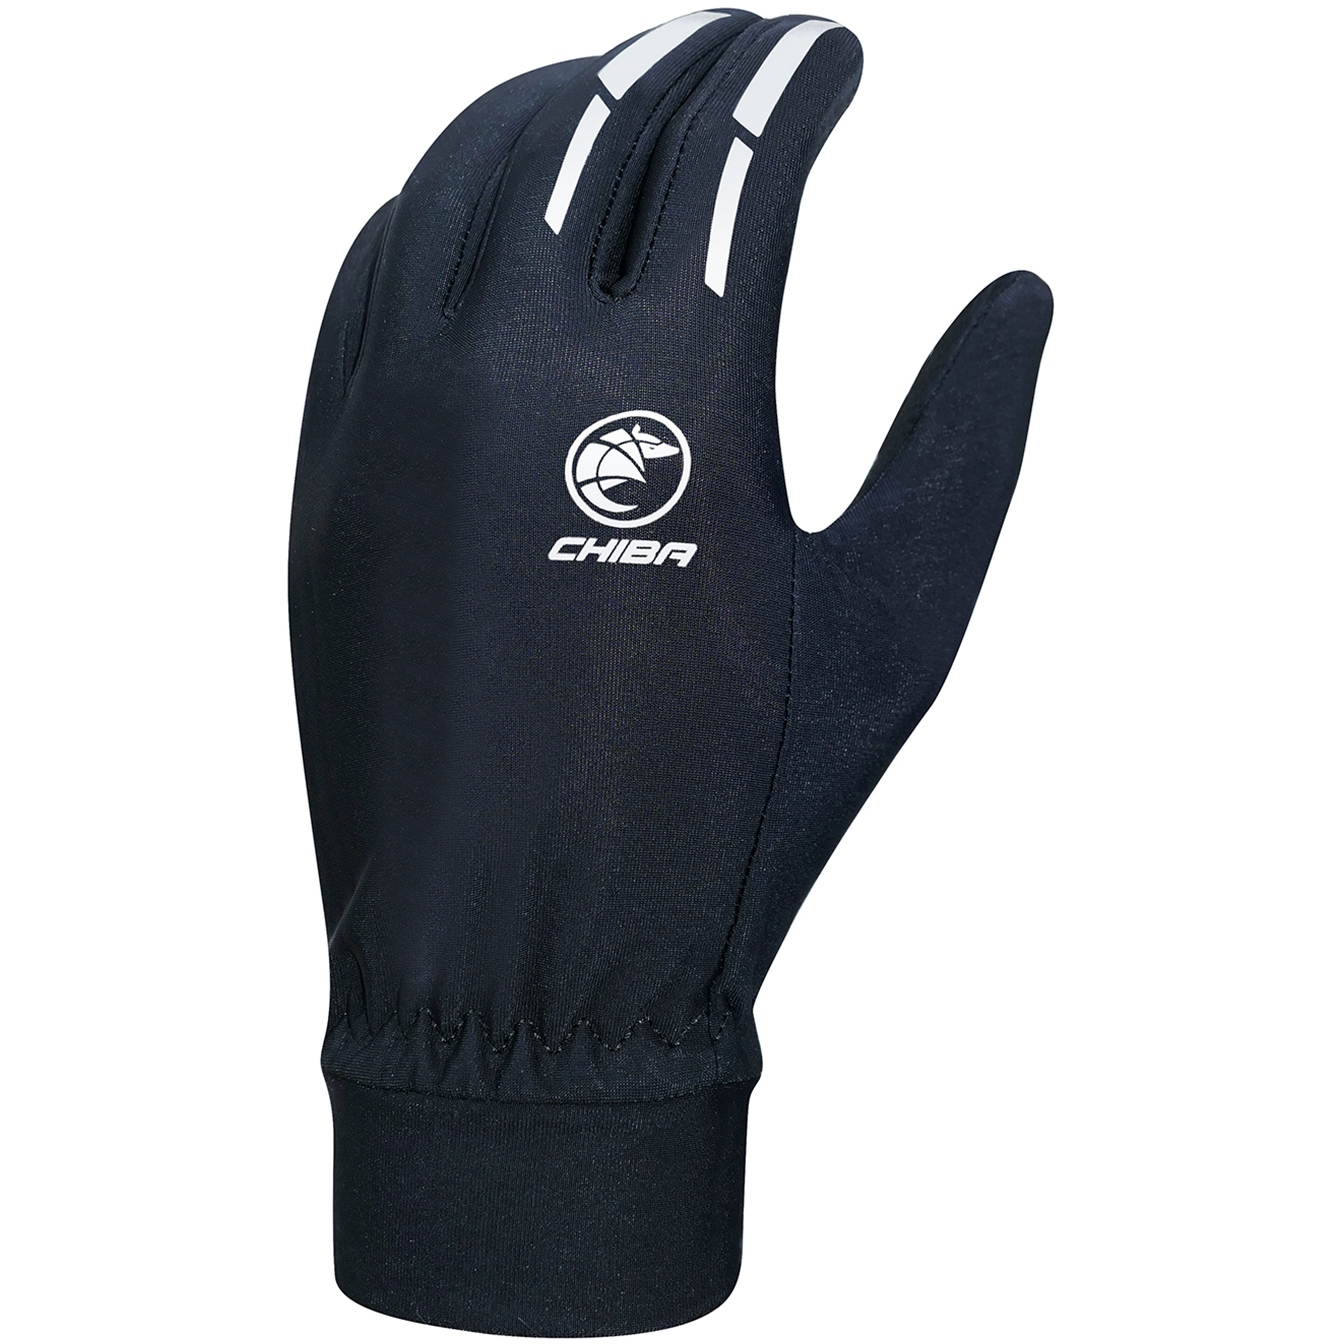 Picture of Chiba Thermofleece Cycling Gloves - black